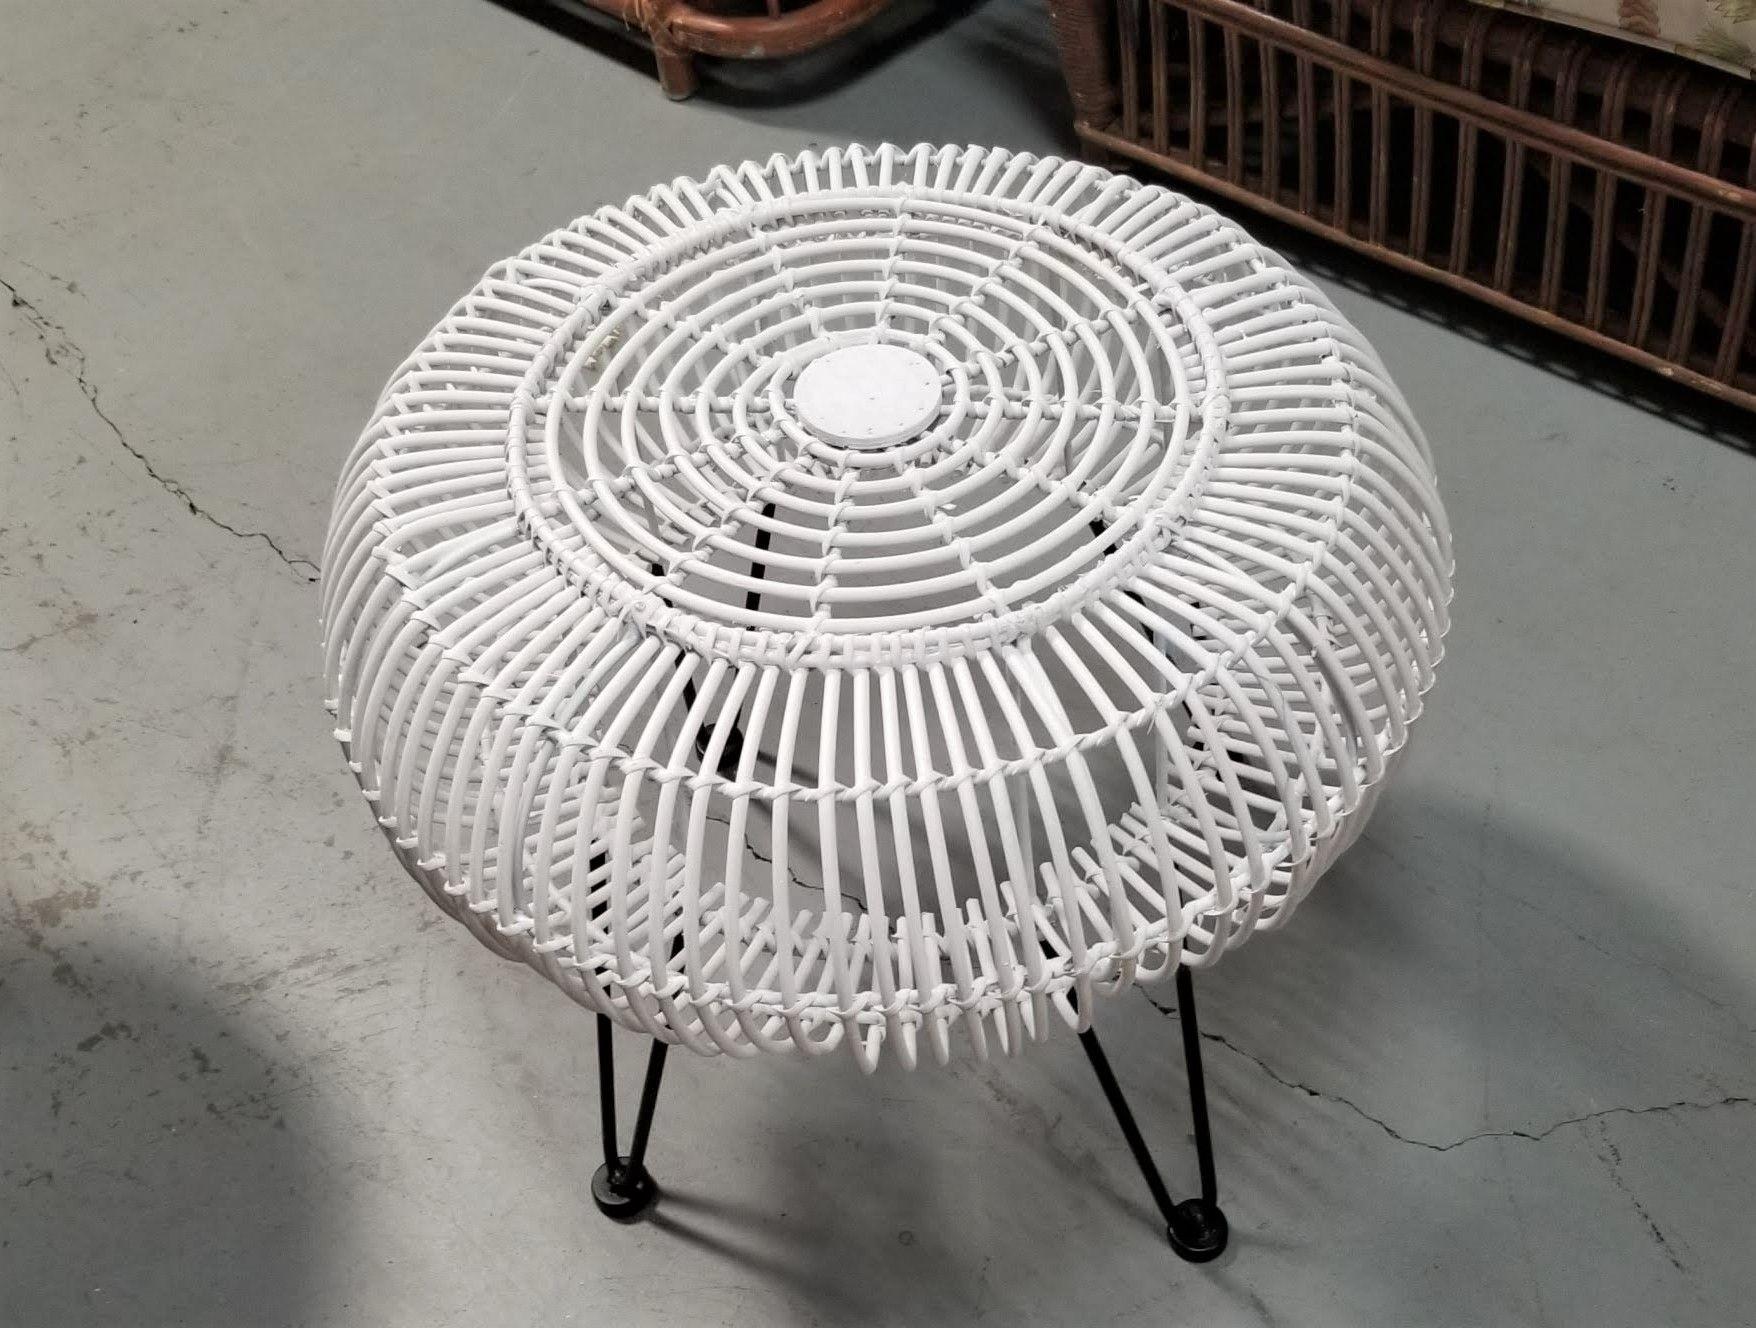 Restored reed rattan ottoman stool in white paint with iron hairpin legs. The stool was inspired by the Italian design coming up in the second half of the 20th century with its rounded stick rattan skeleton design but a distinctly American influence